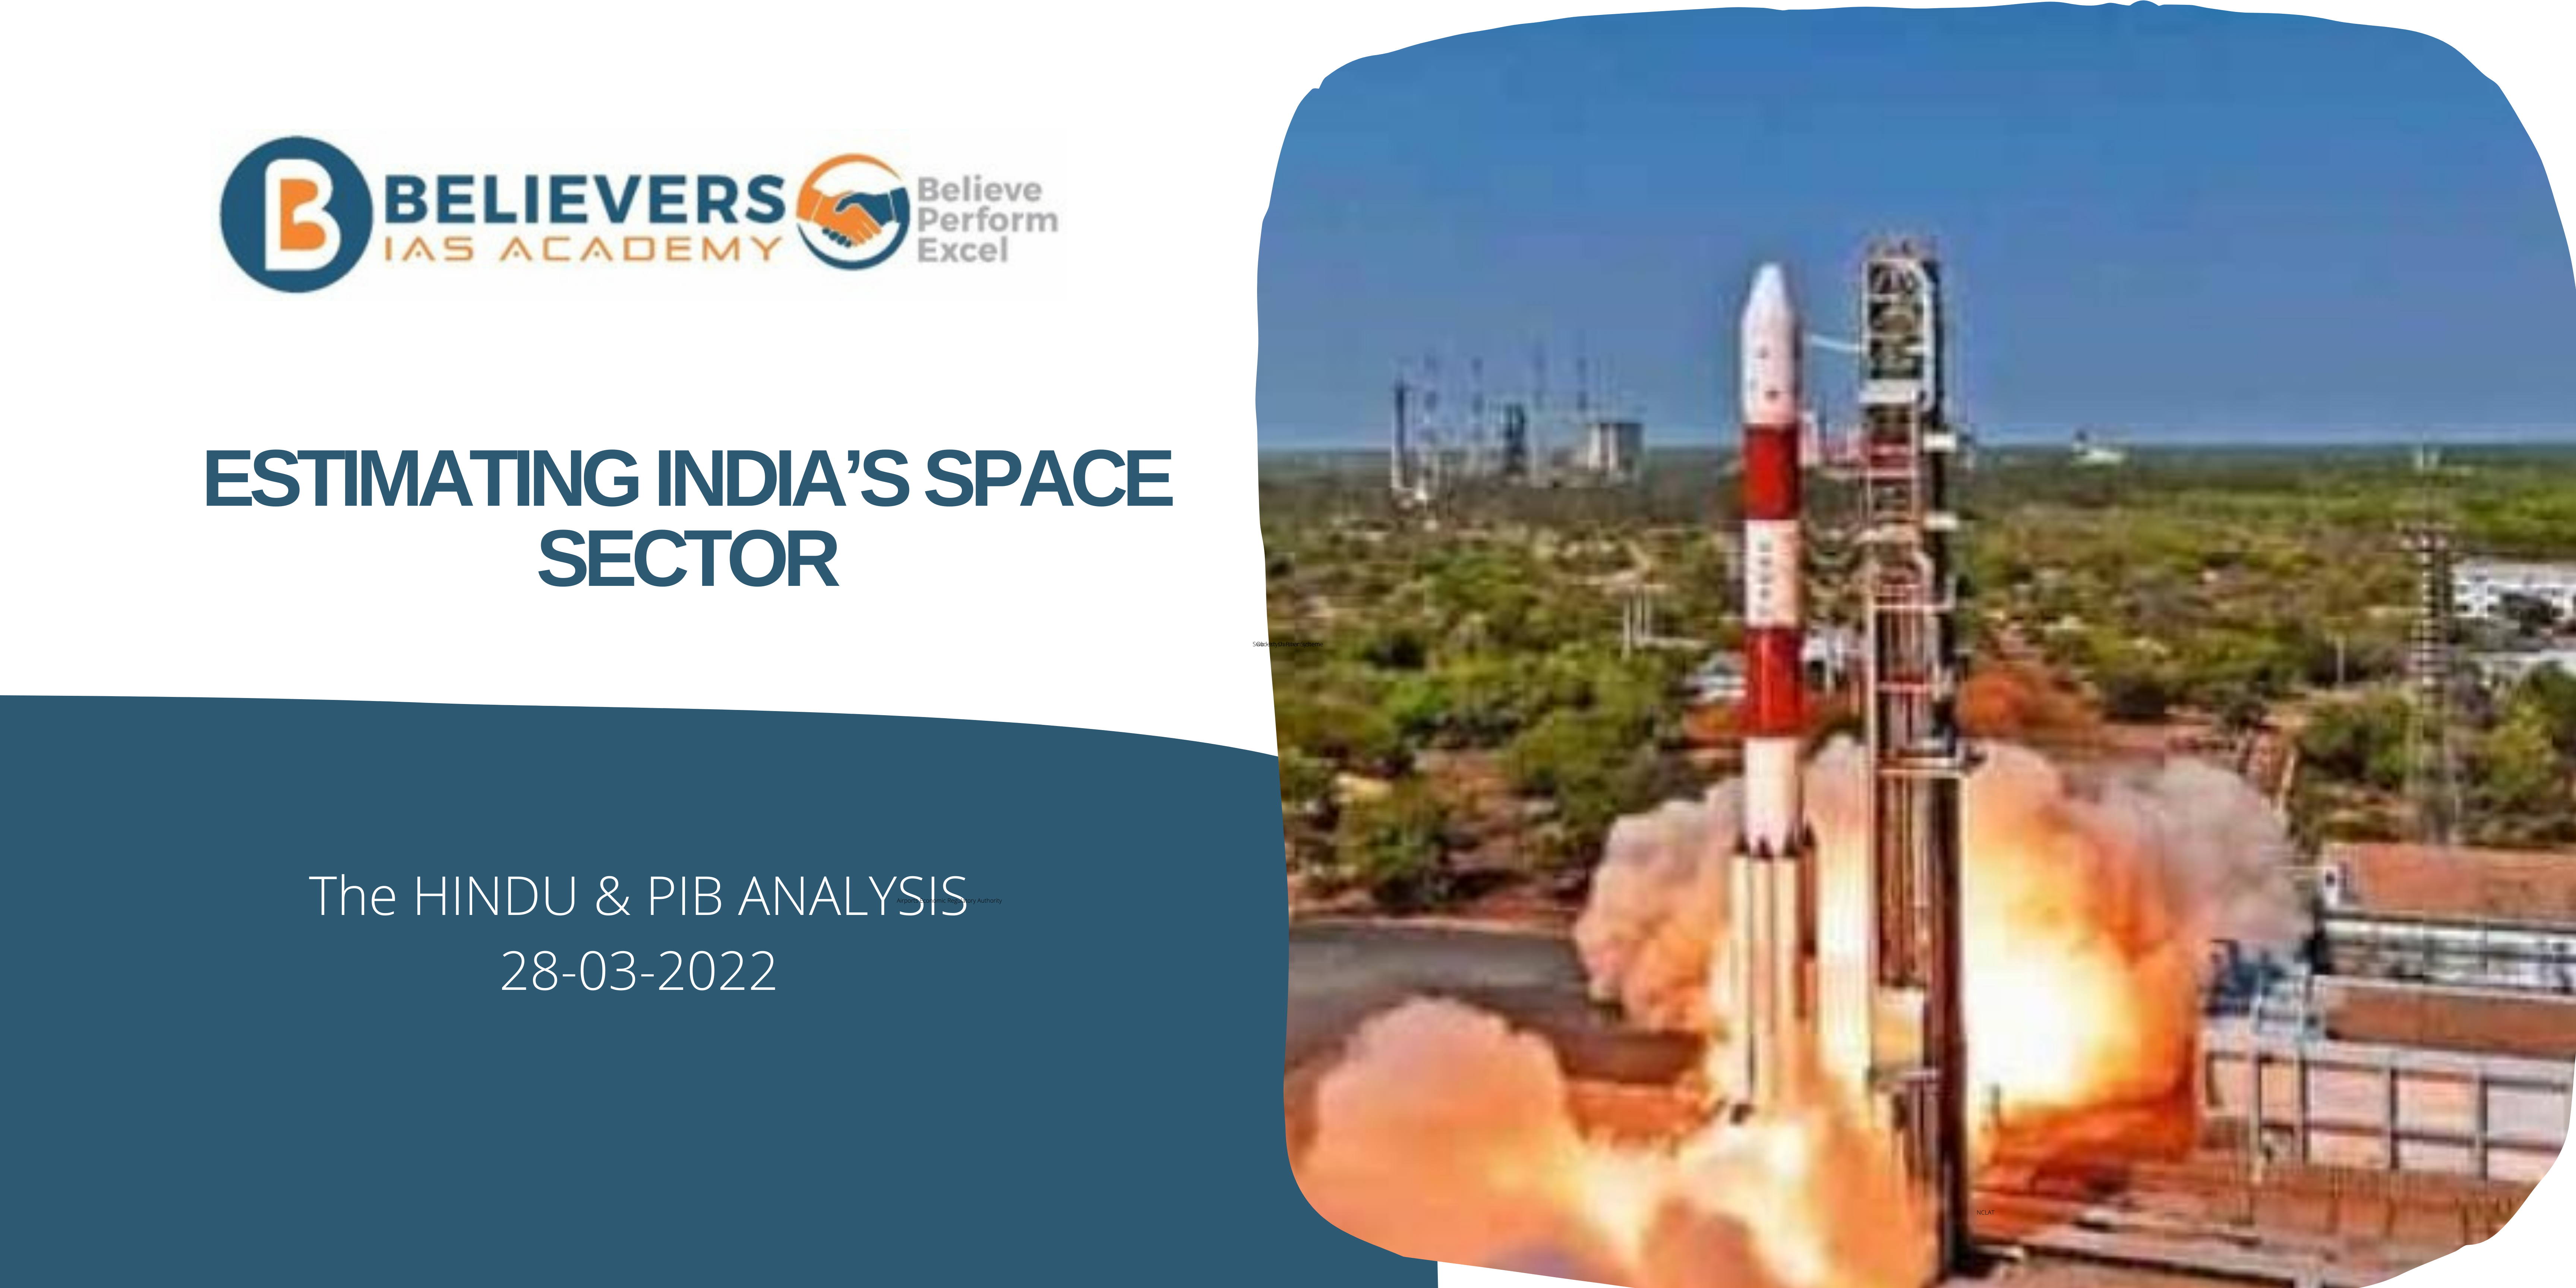 UPSC Current affairs - Estimating India’s space sector